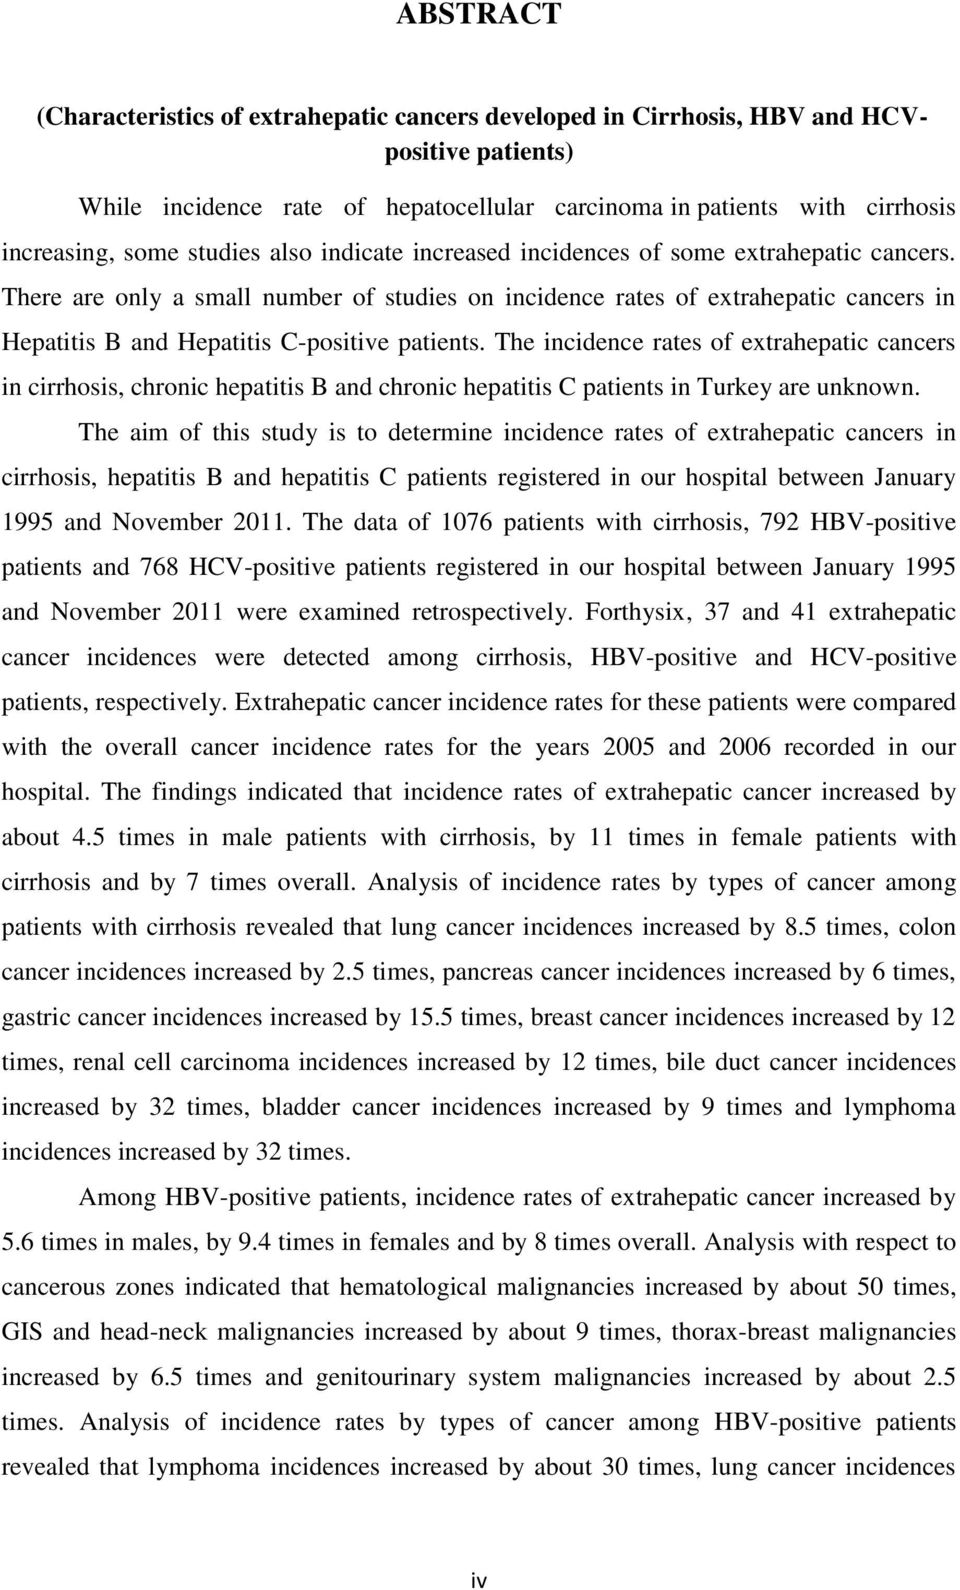 There are only a small number of studies on incidence rates of extrahepatic cancers in Hepatitis B and Hepatitis C-positive patients.